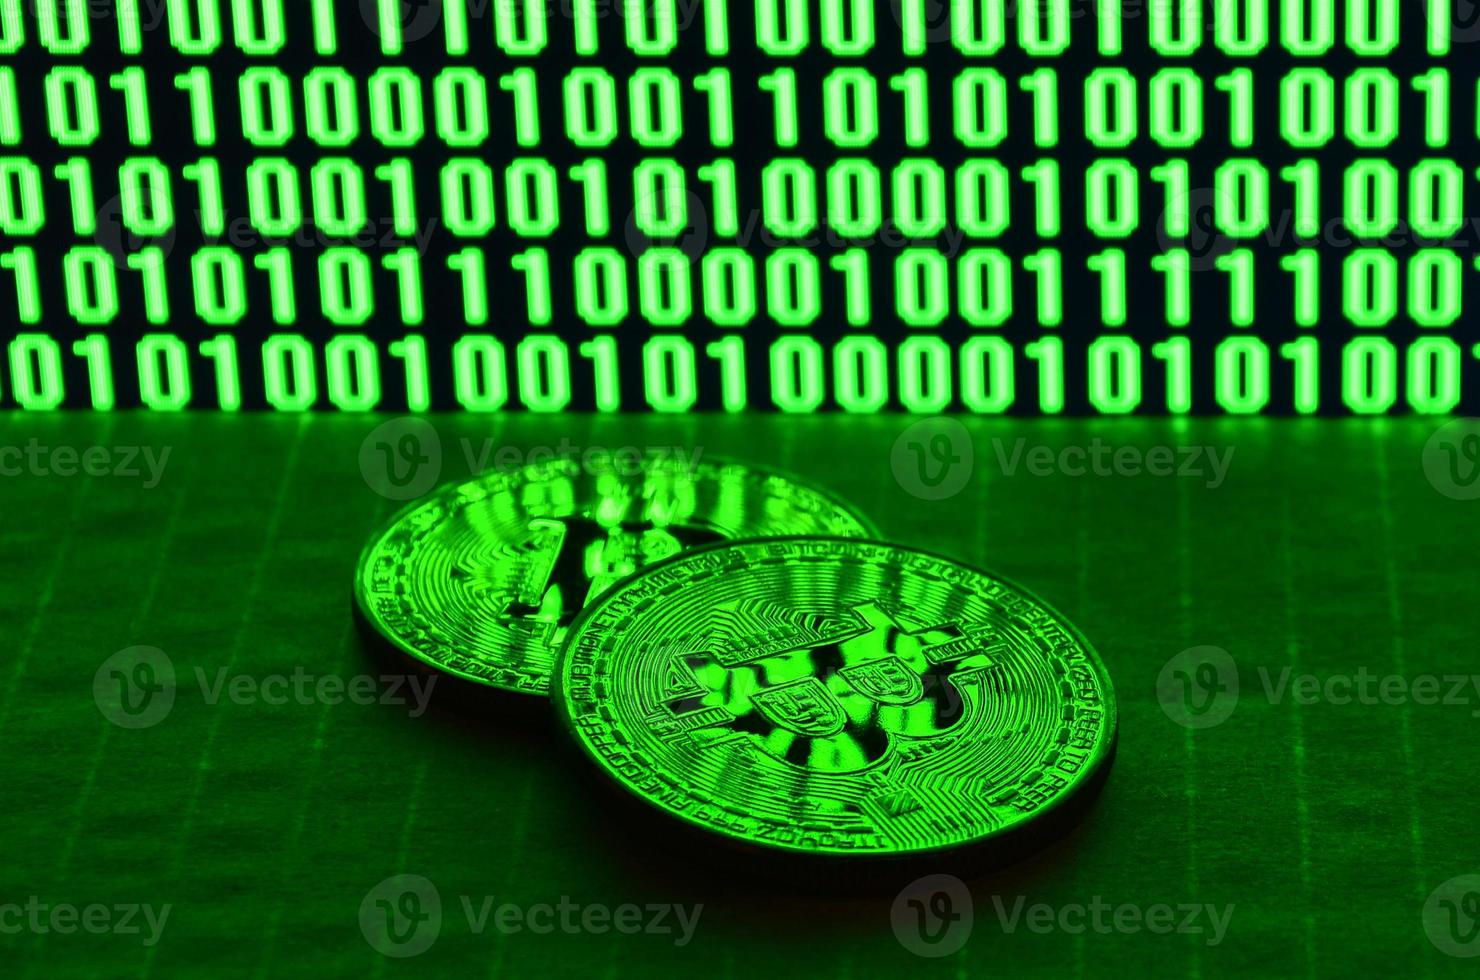 A pair of bitcoins lies on a cardboard surface on the background of a monitor depicting a binary code of bright green zeros and one units on a black background. Low key lighting photo